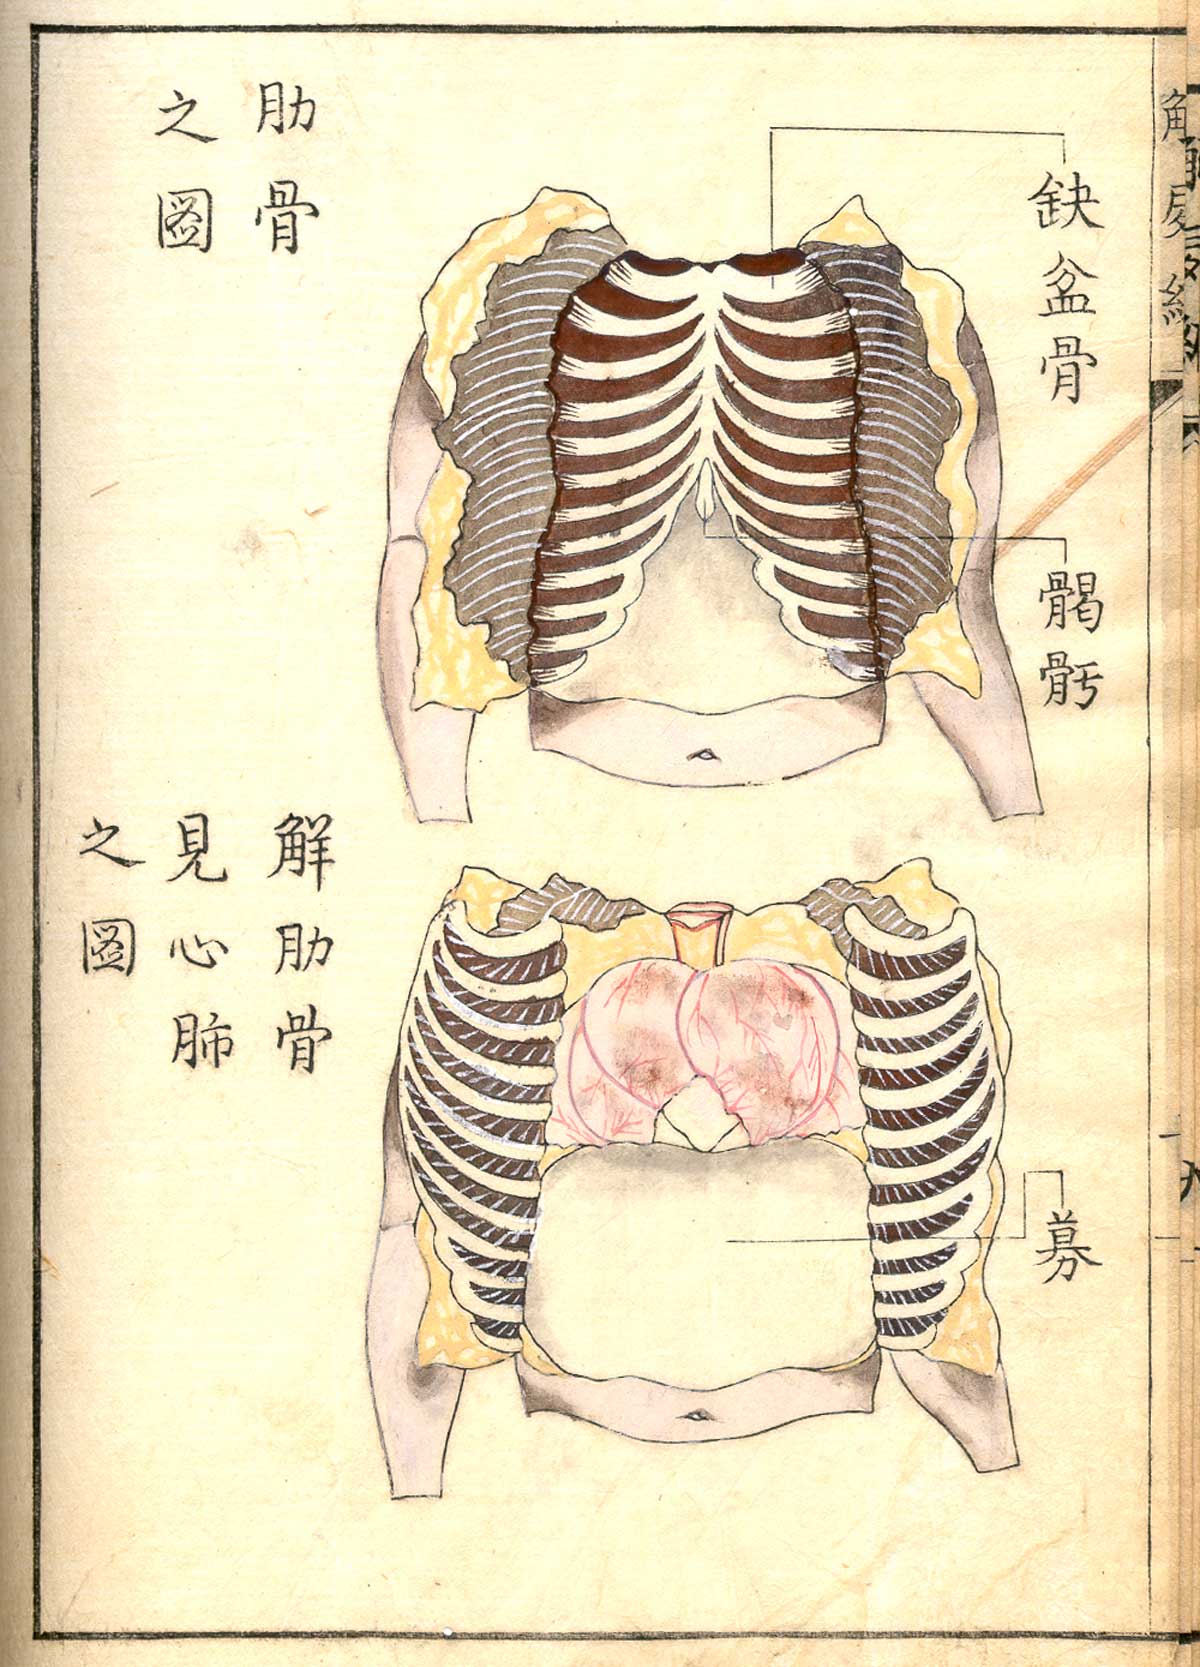 Hand colored woodcut of two images of the ribcage, the first on top of the page showing a view of the ribs, the lower one with the ribs pulled open to reveal the lungs and heart, with Japanese text describing some of the structures, from Shinnin Kawaguchi's Kaishi hen, NLM Call no.: WZ 260 K21k 1772.